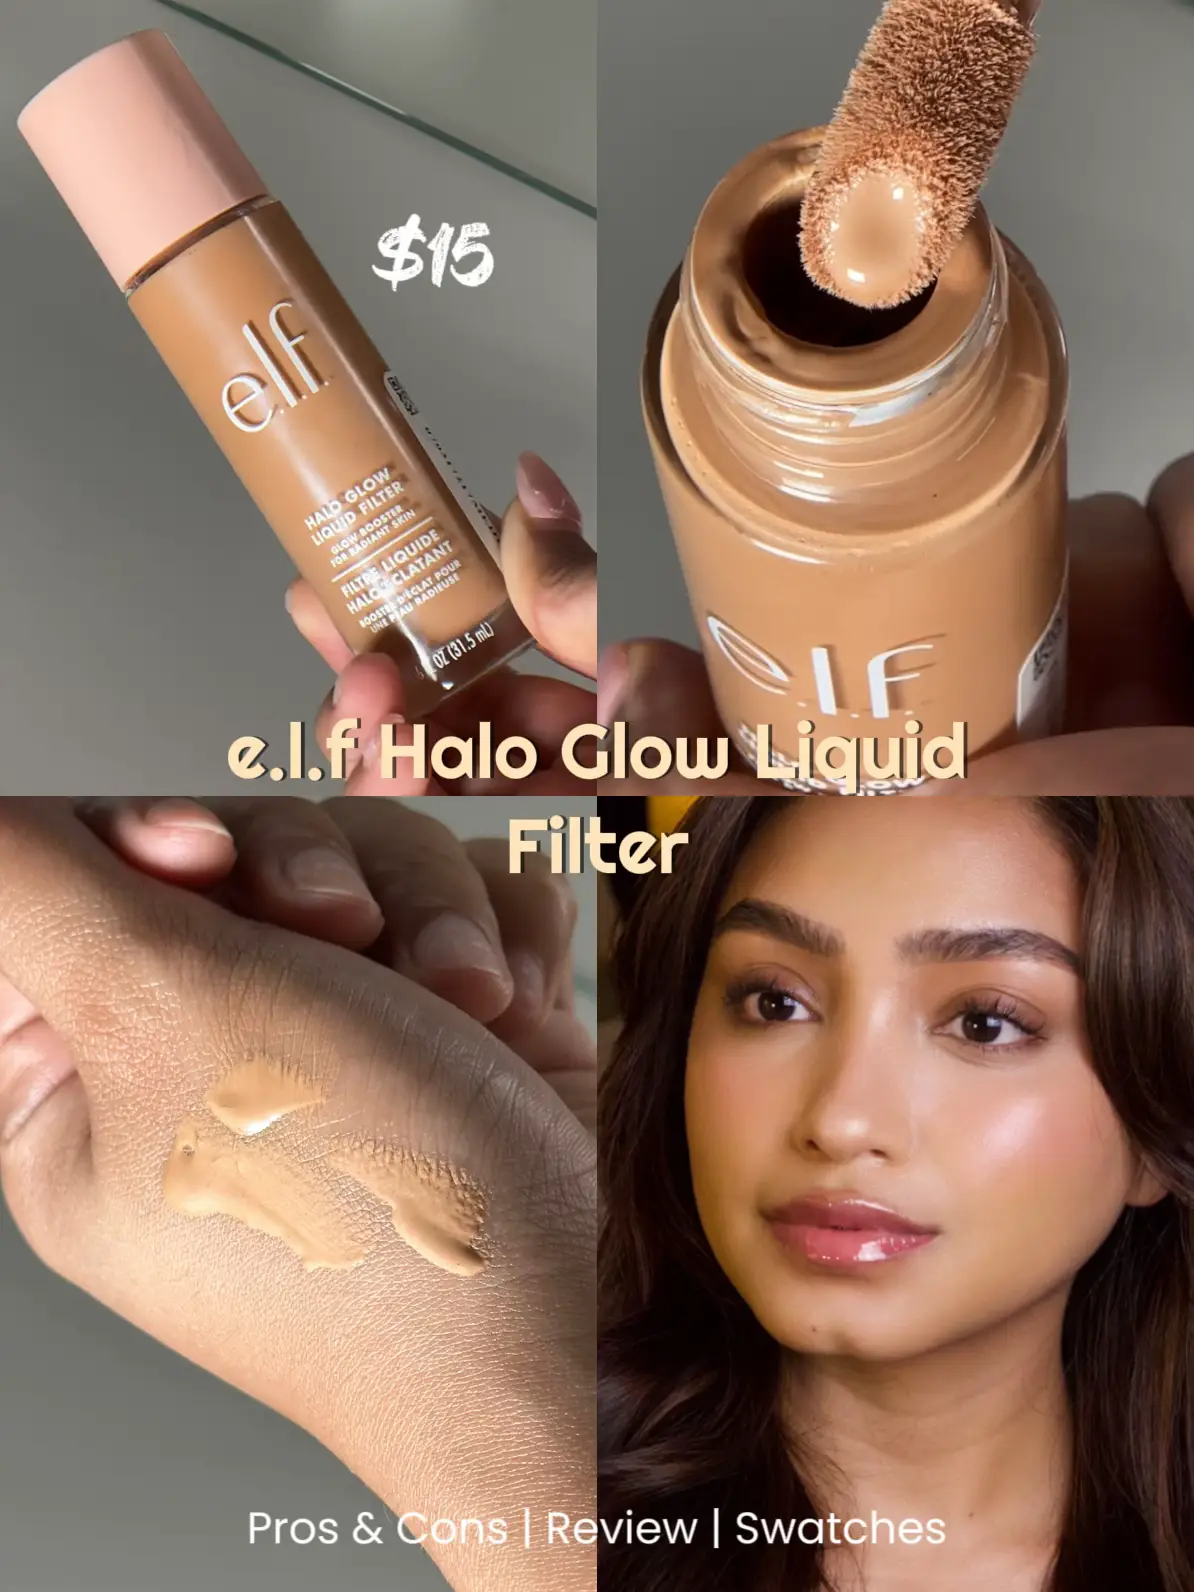 elf Halo Glow Liquid Filter, Complexion Booster For A Glowing, Soft-Focus  Look, Infused With Hyaluronic Acid, Vegan & Cruelty-Free, 0.5 Fair